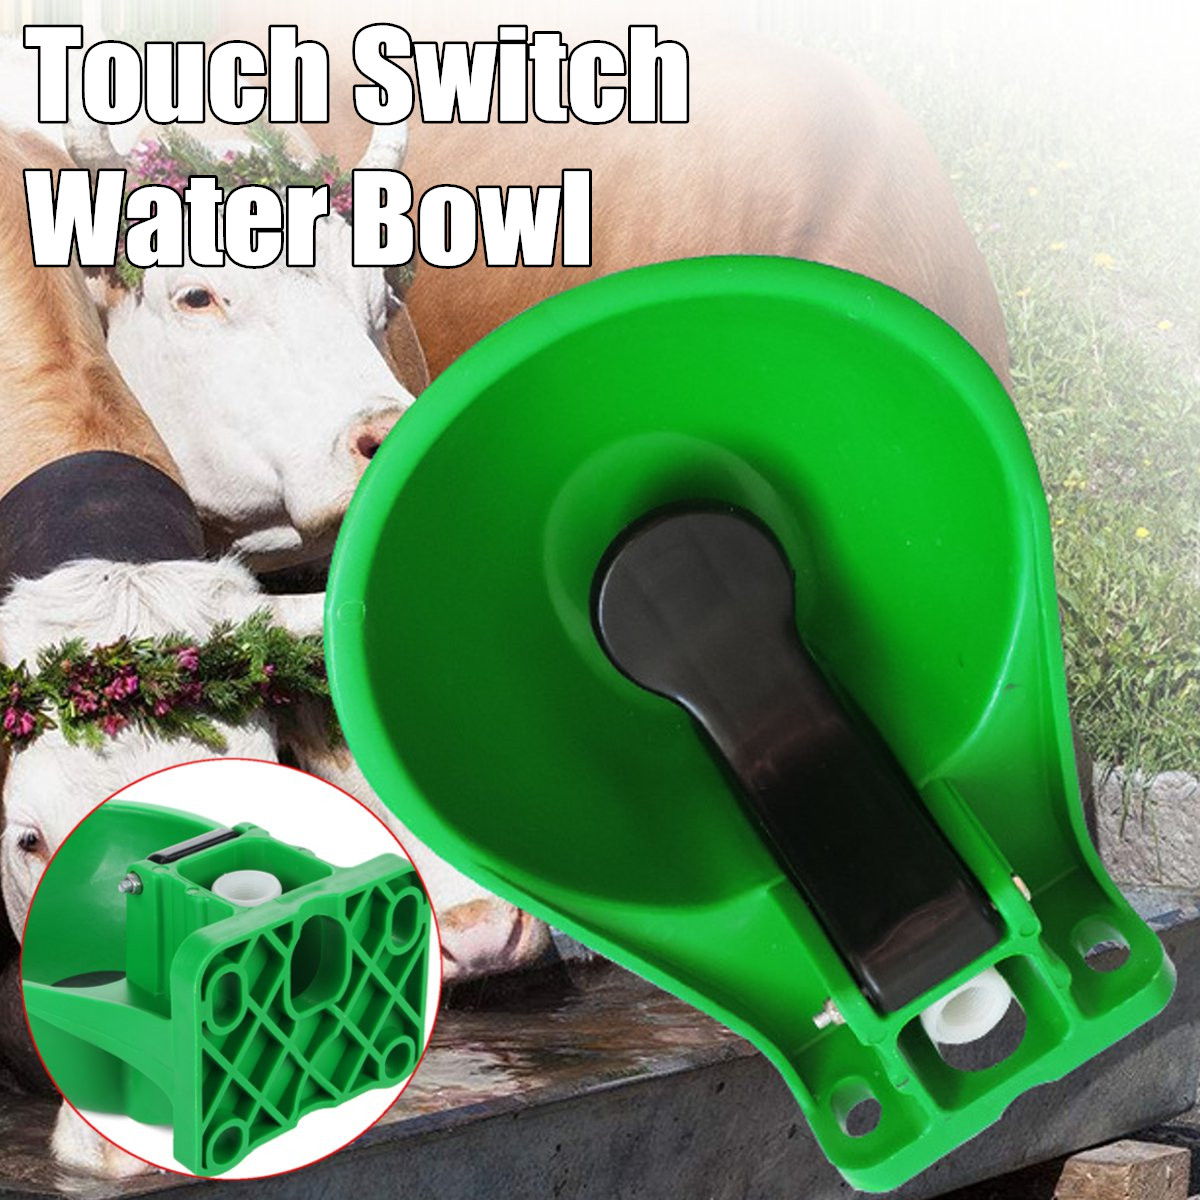 Large-Automatic-Touch-Switch-Water-Bowl-Bottle-Dispenser-Farm-Cow-Horse-Drinking-Waterer-1385253-1